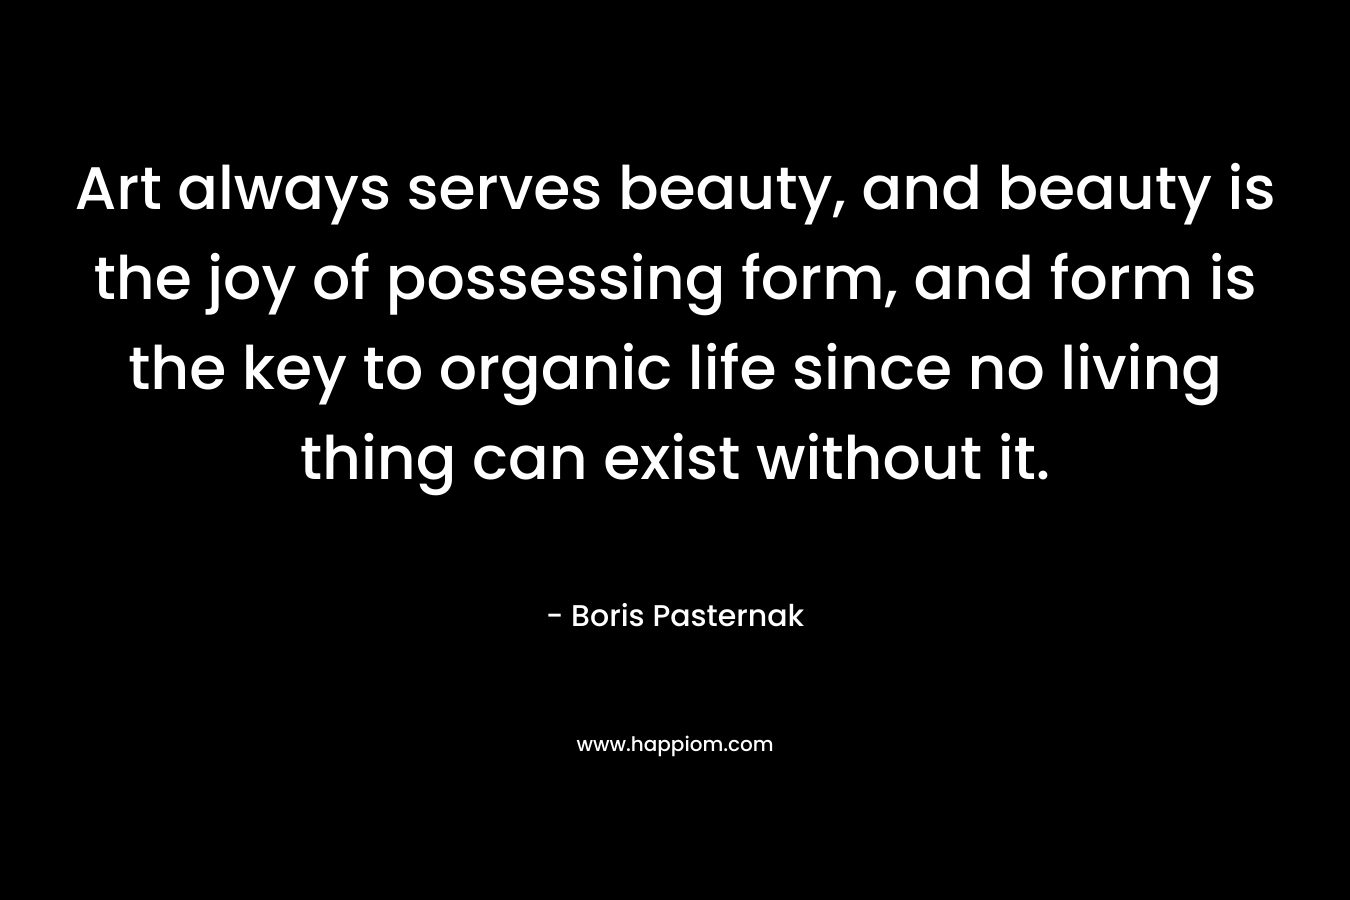 Art always serves beauty, and beauty is the joy of possessing form, and form is the key to organic life since no living thing can exist without it. – Boris Pasternak